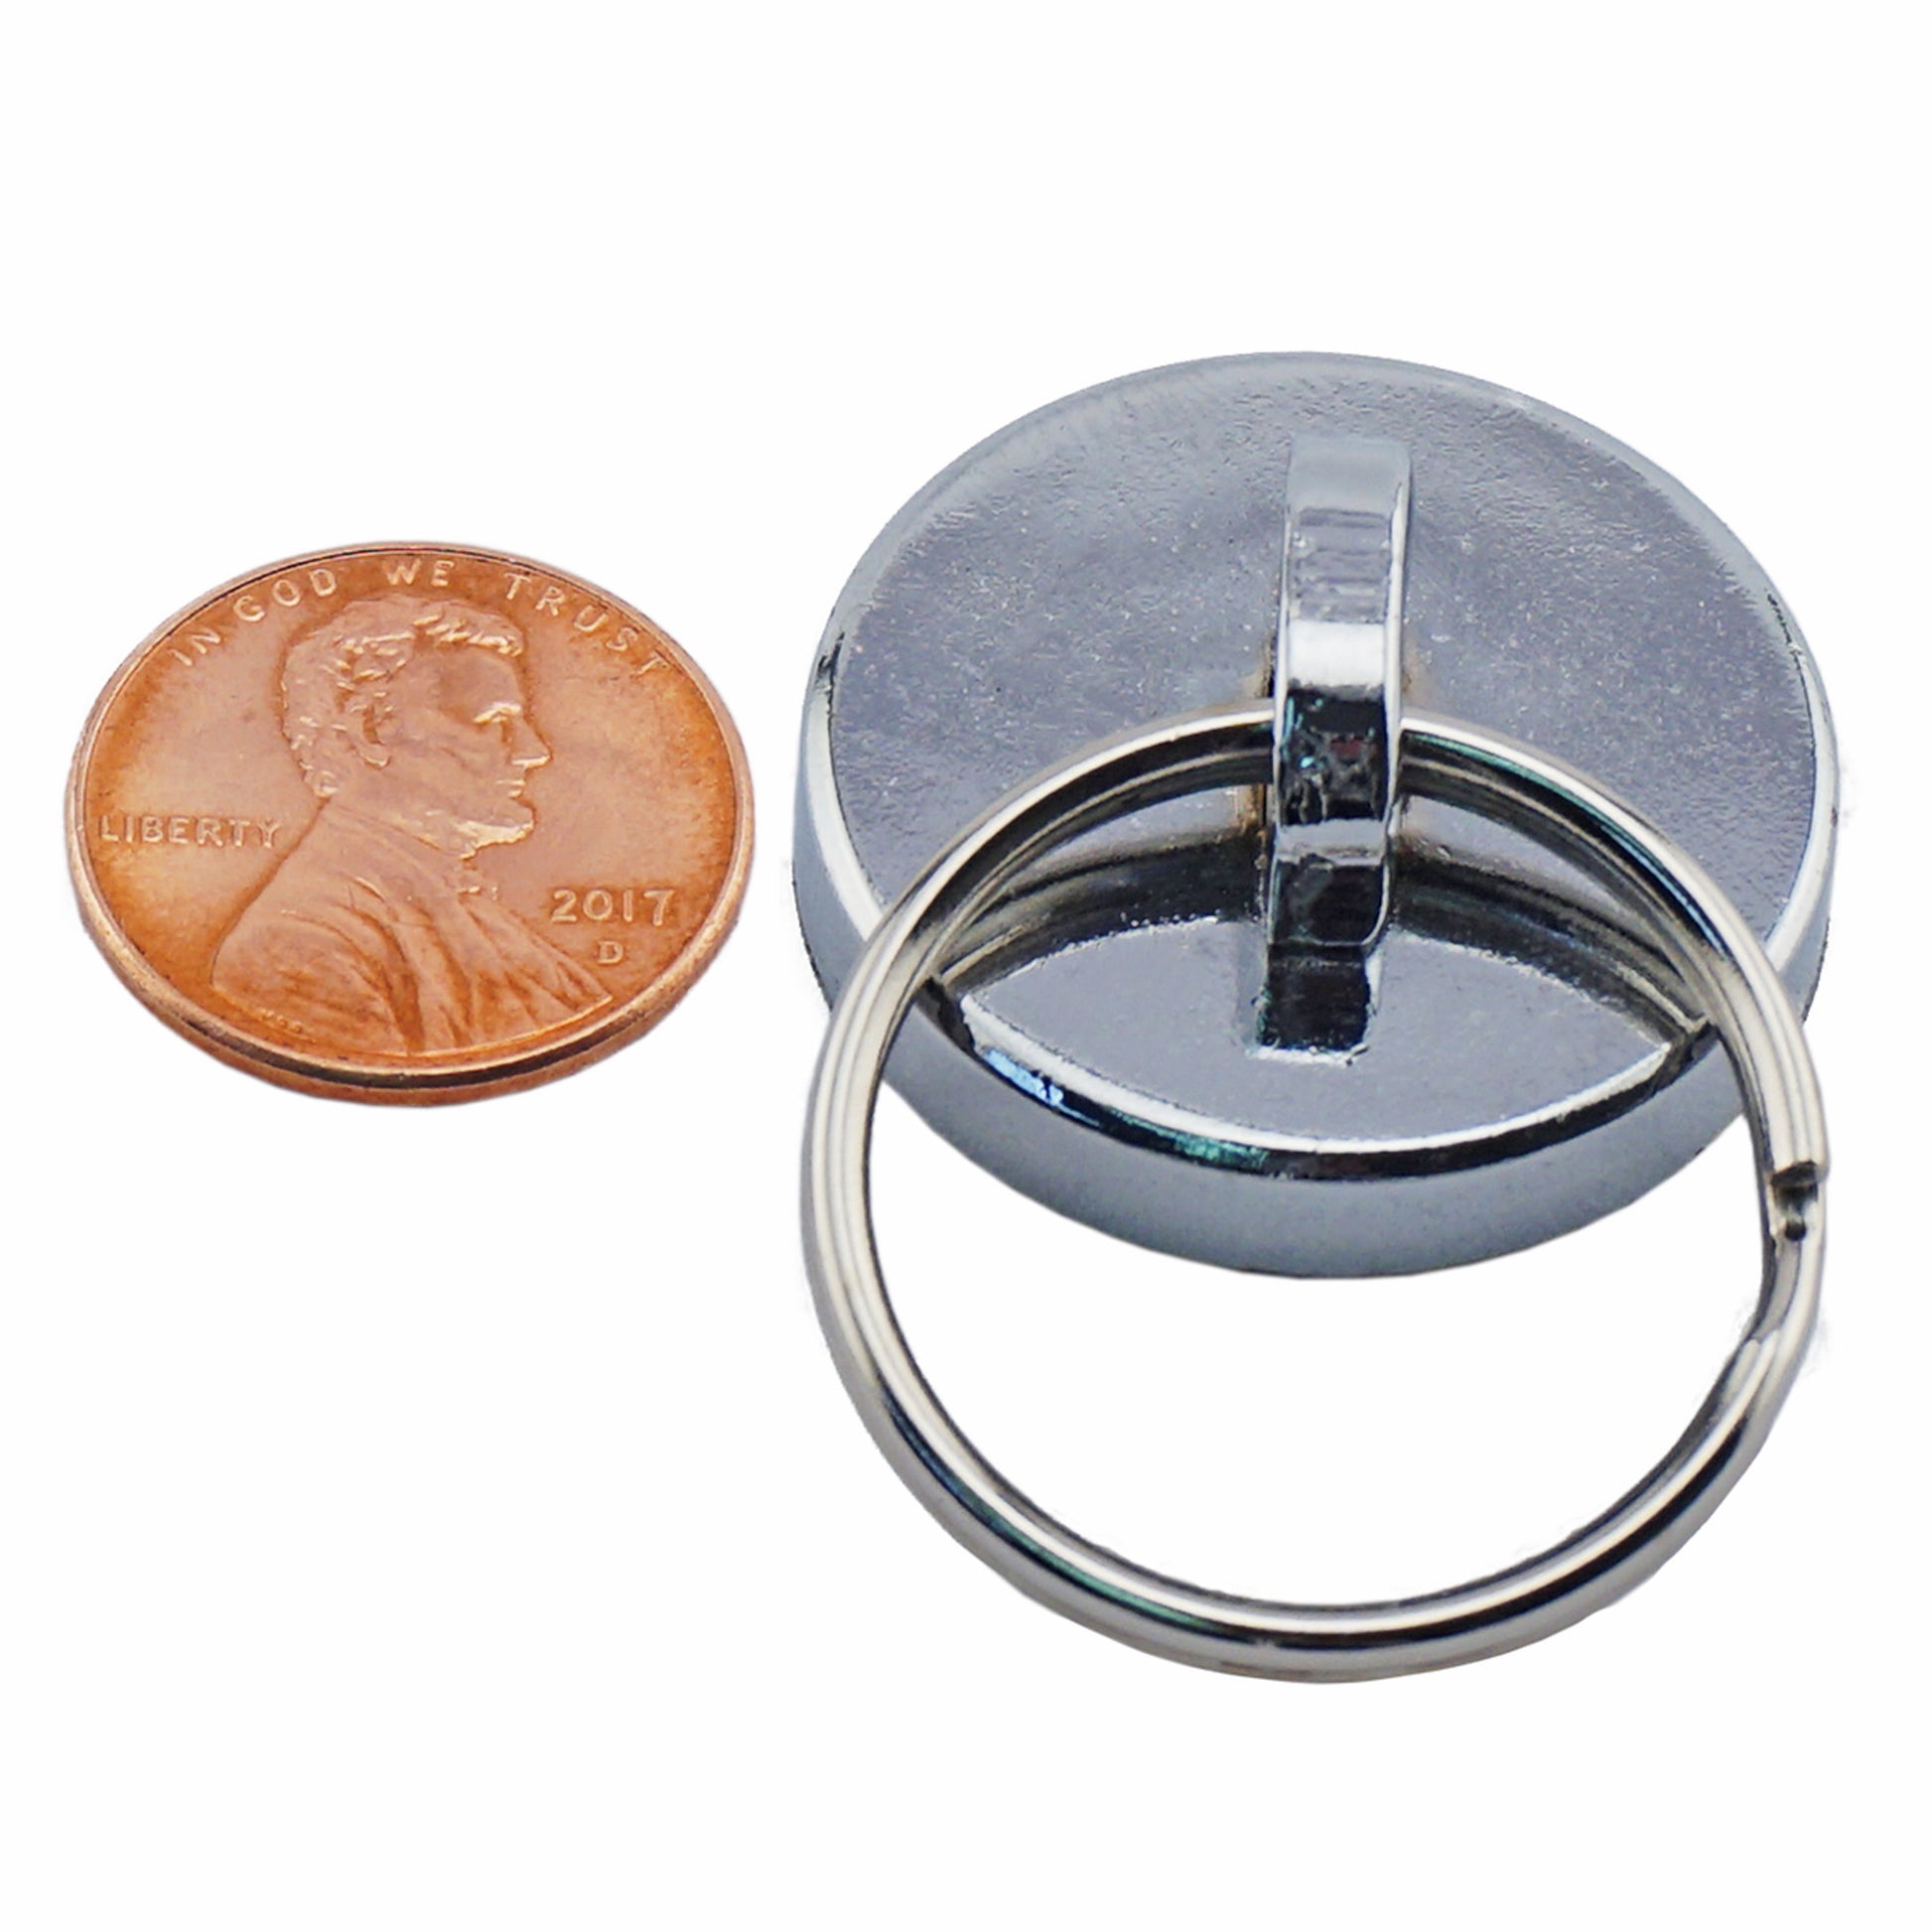 Load image into Gallery viewer, 07287 Neodymium Magnetic Keyring - Compared to Penny for Size Reference